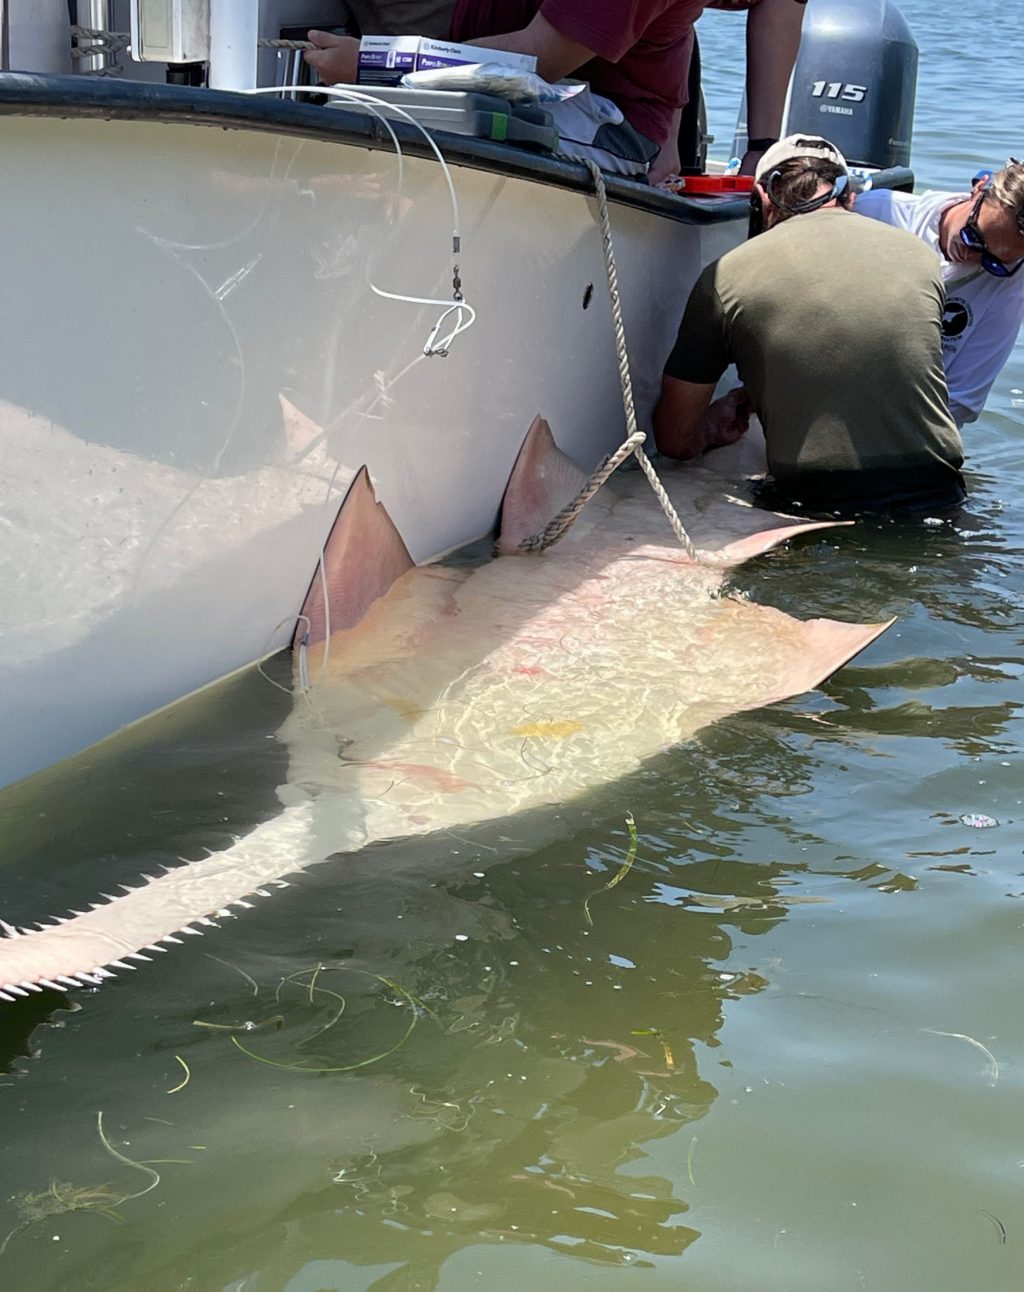 Researchers applying a tagging device to a Sawfish